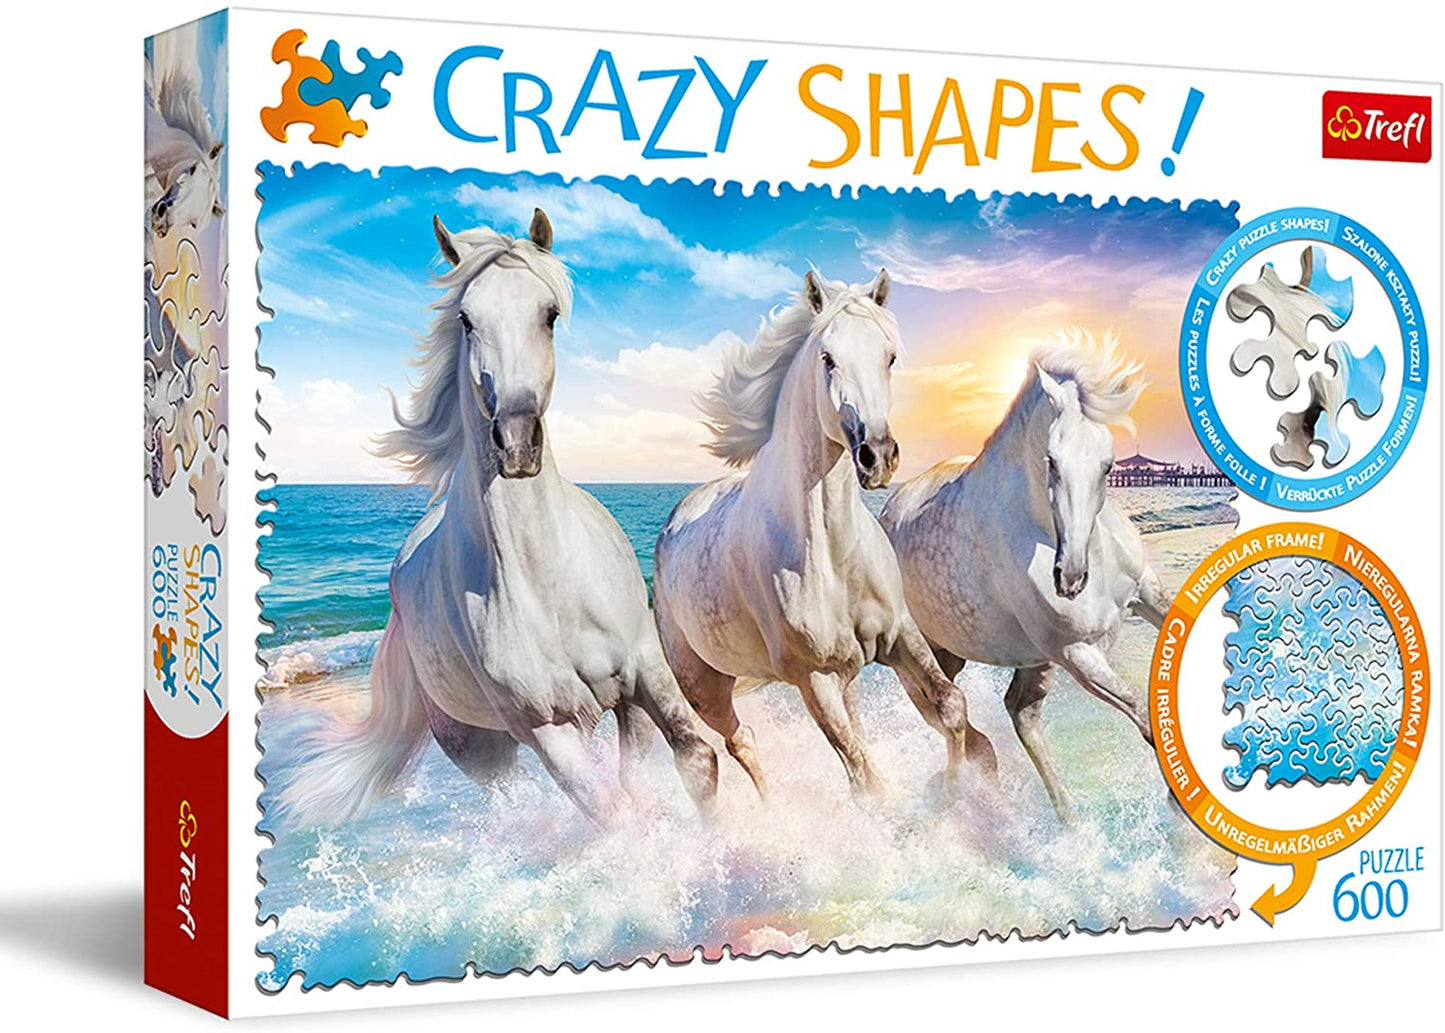 Trefl - Crazy Shapes - Galloping Among the Waves - 600 Piece Jigsaw Puzzle